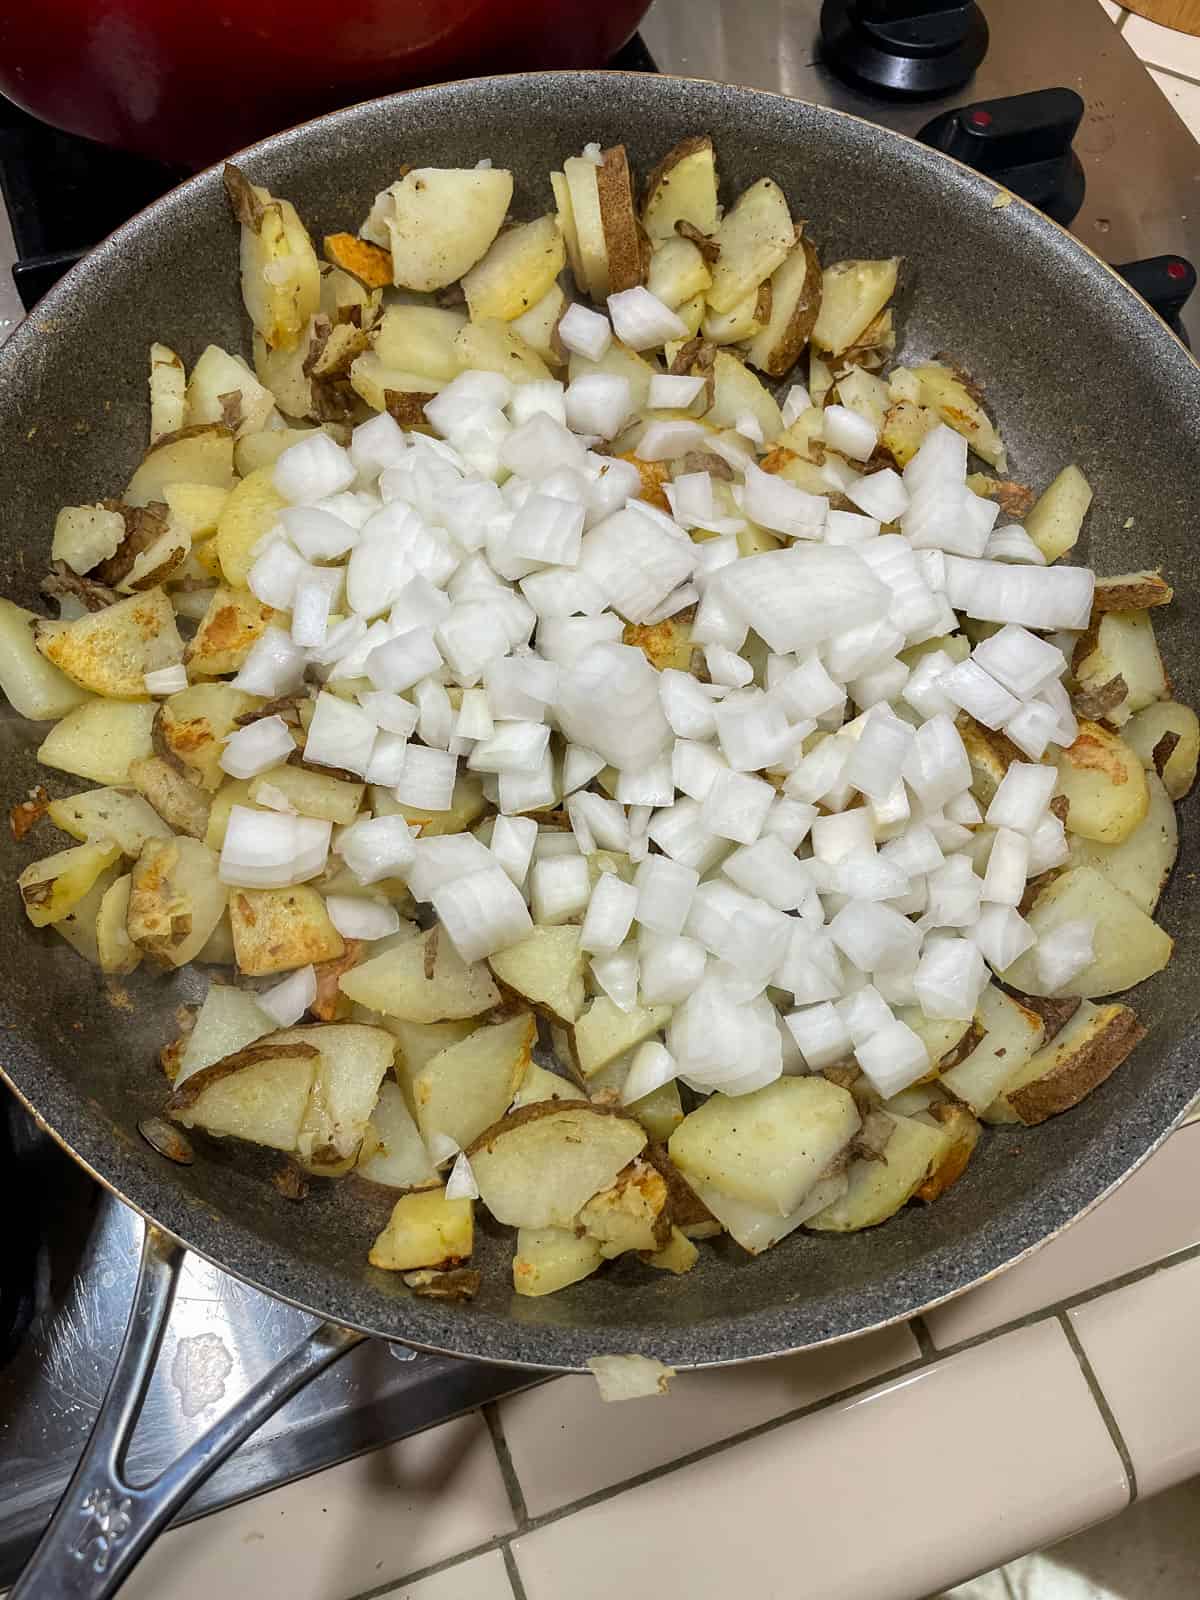 Added onion to browned potatoes in non-stick skillet